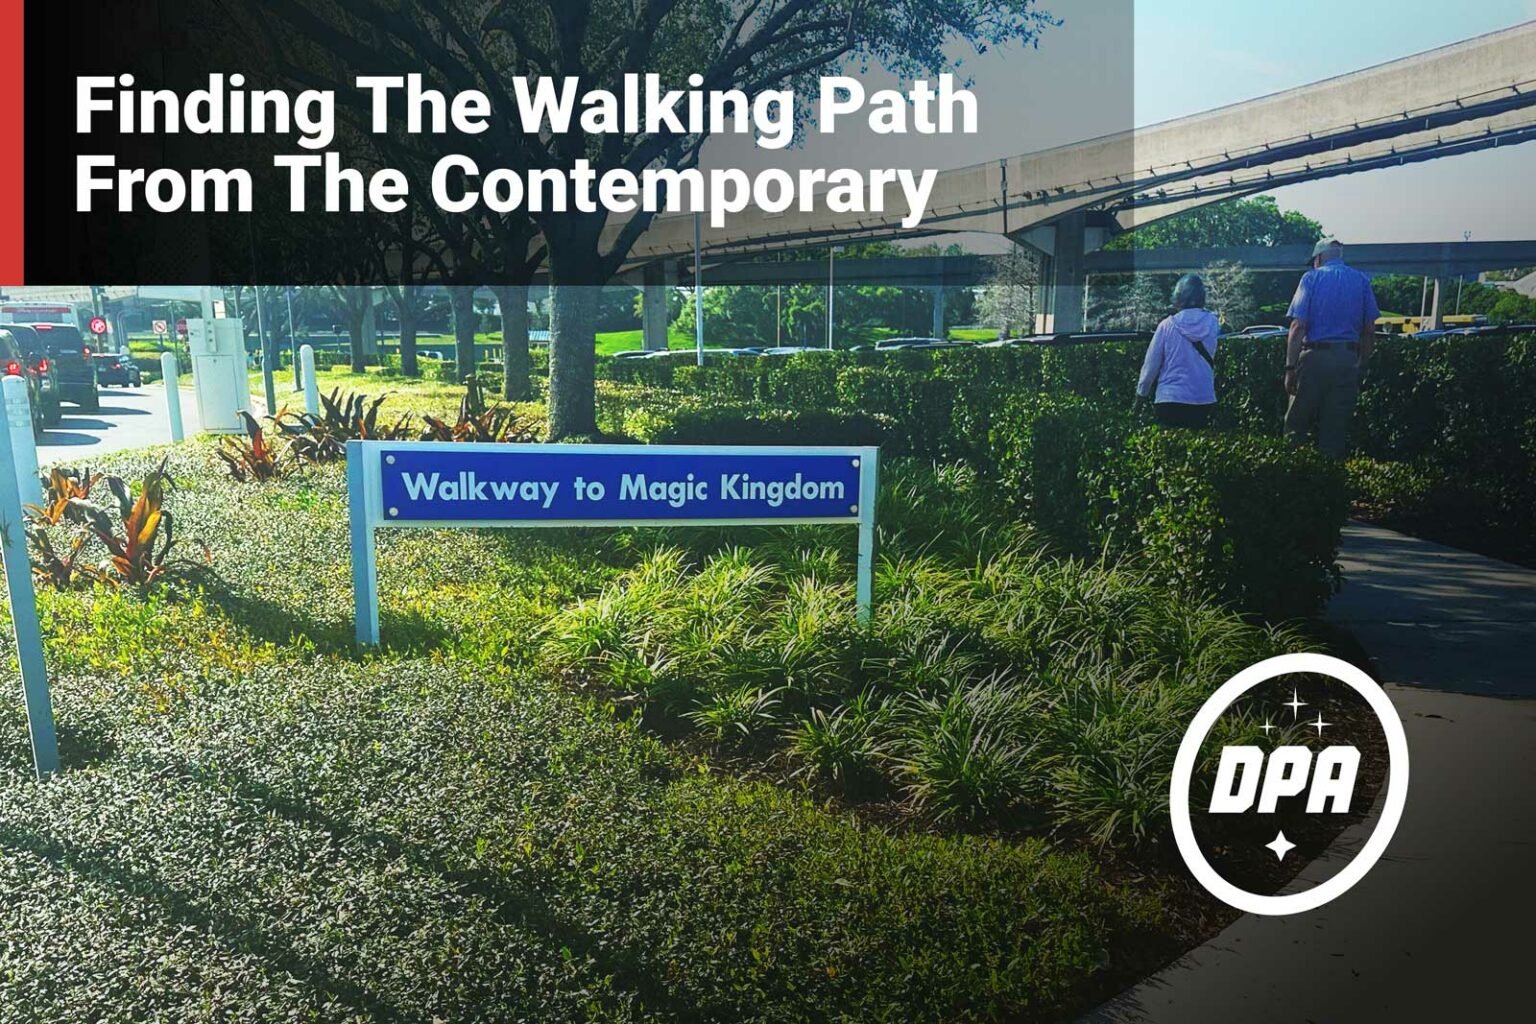 The walking path from the Contemporary